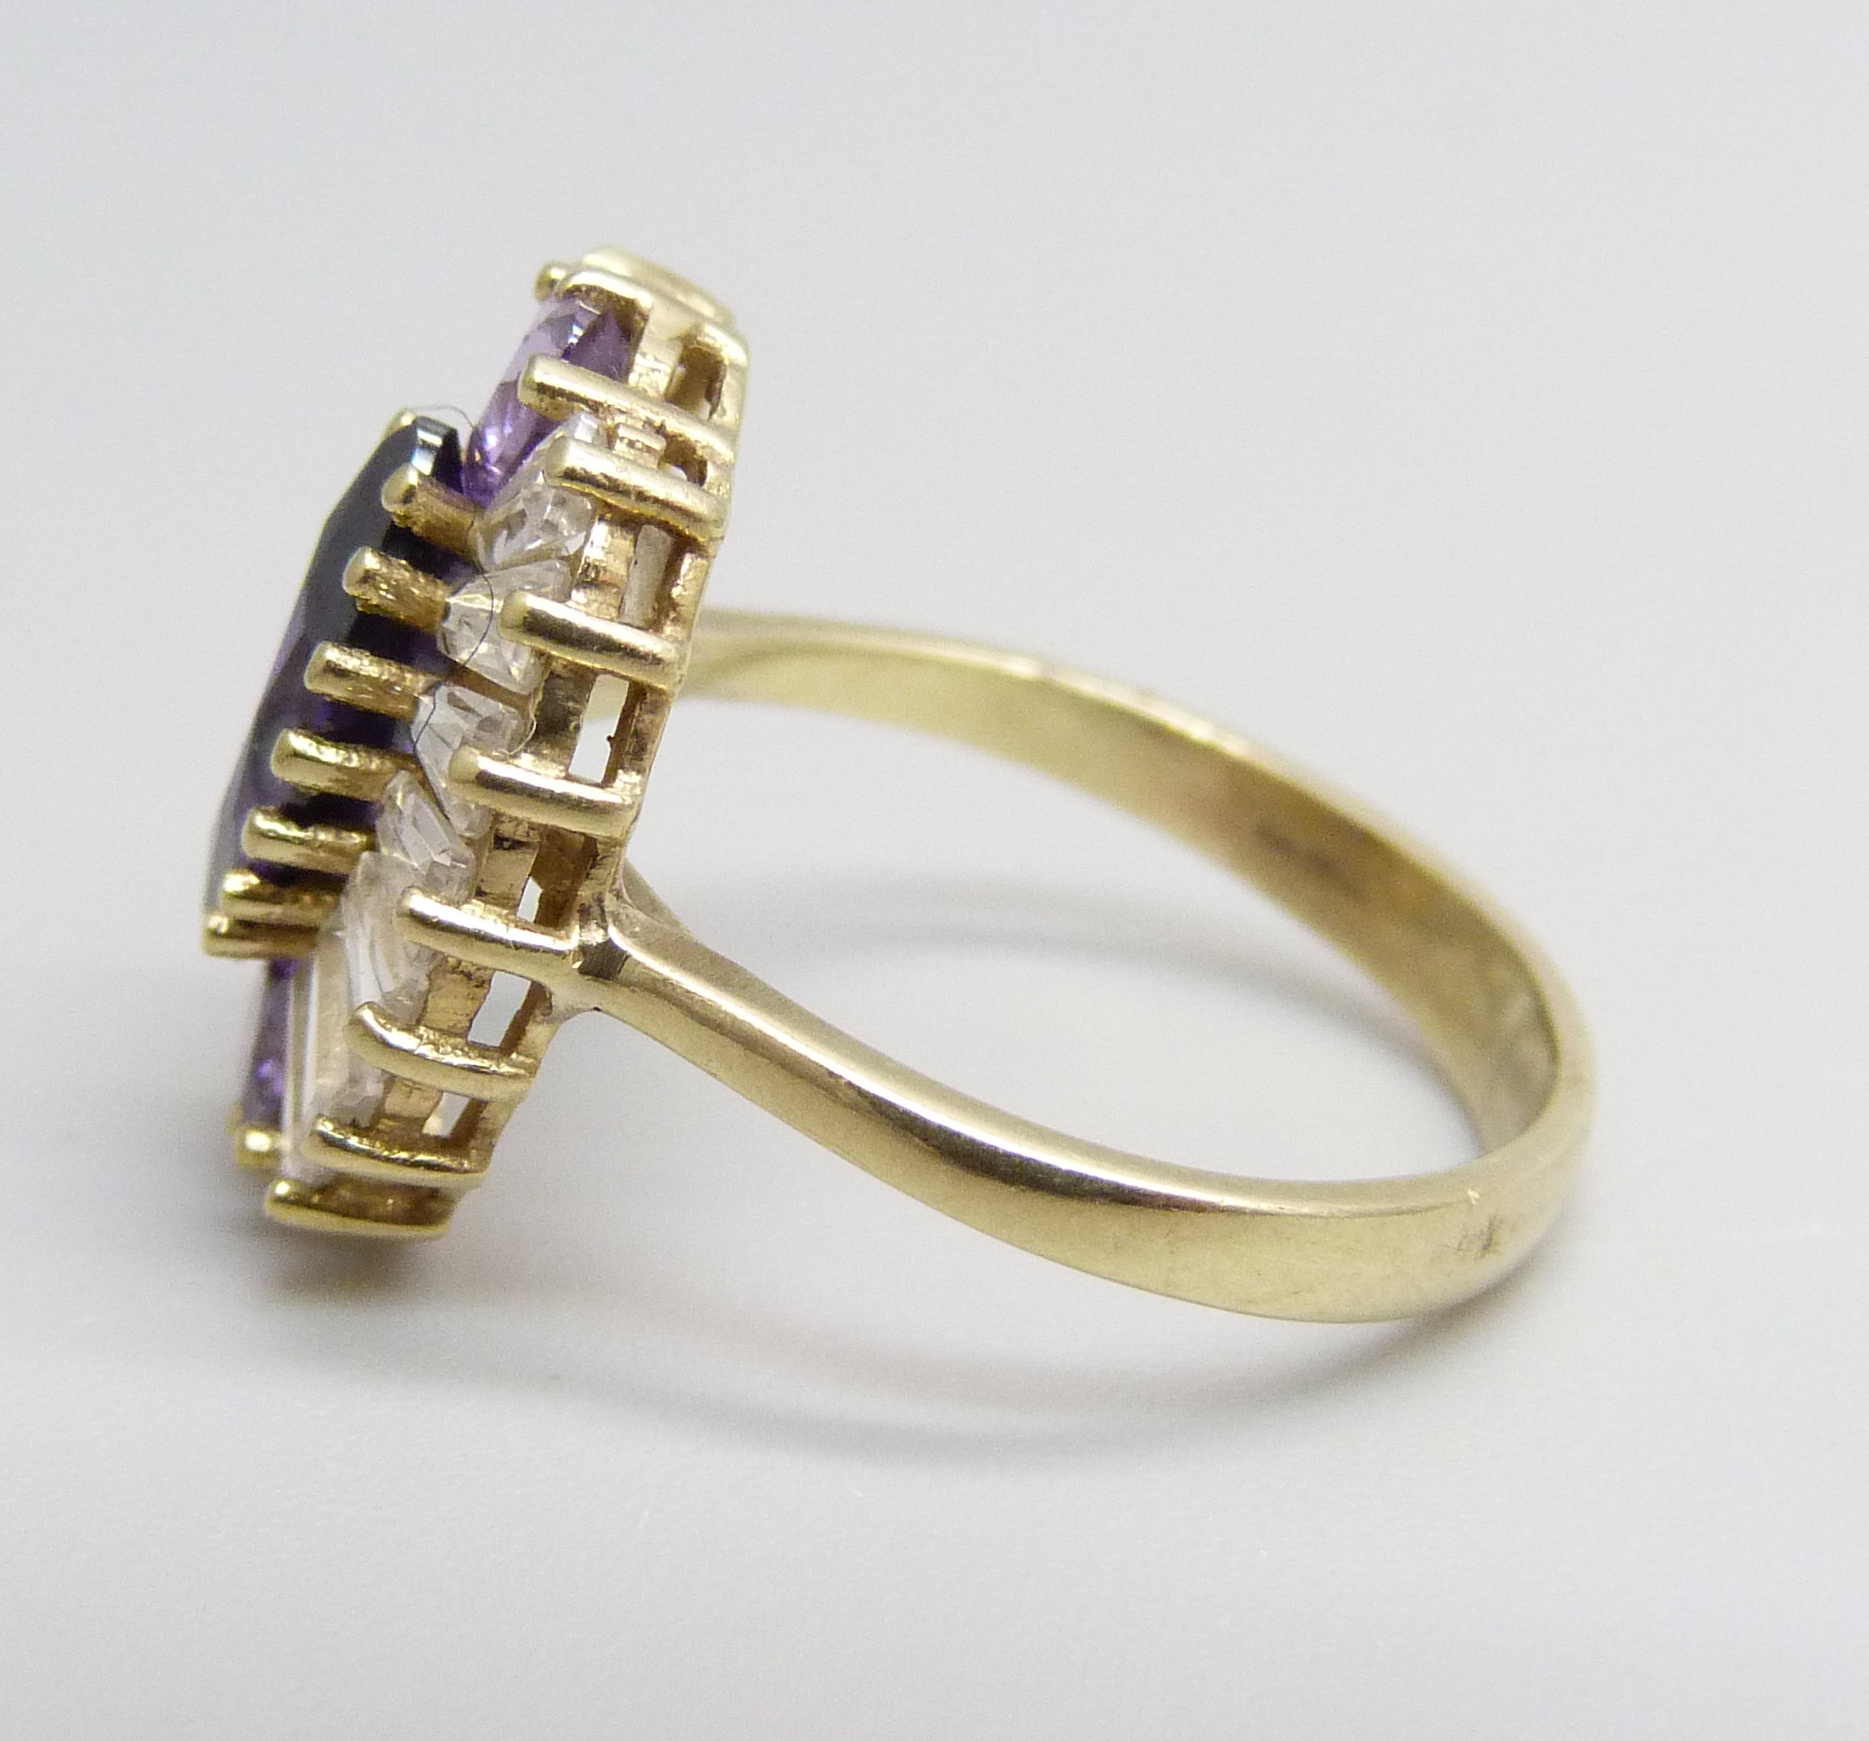 A 9ct gold, white and amethyst stone Art Deco style ring, 3.4g, L - Image 2 of 3